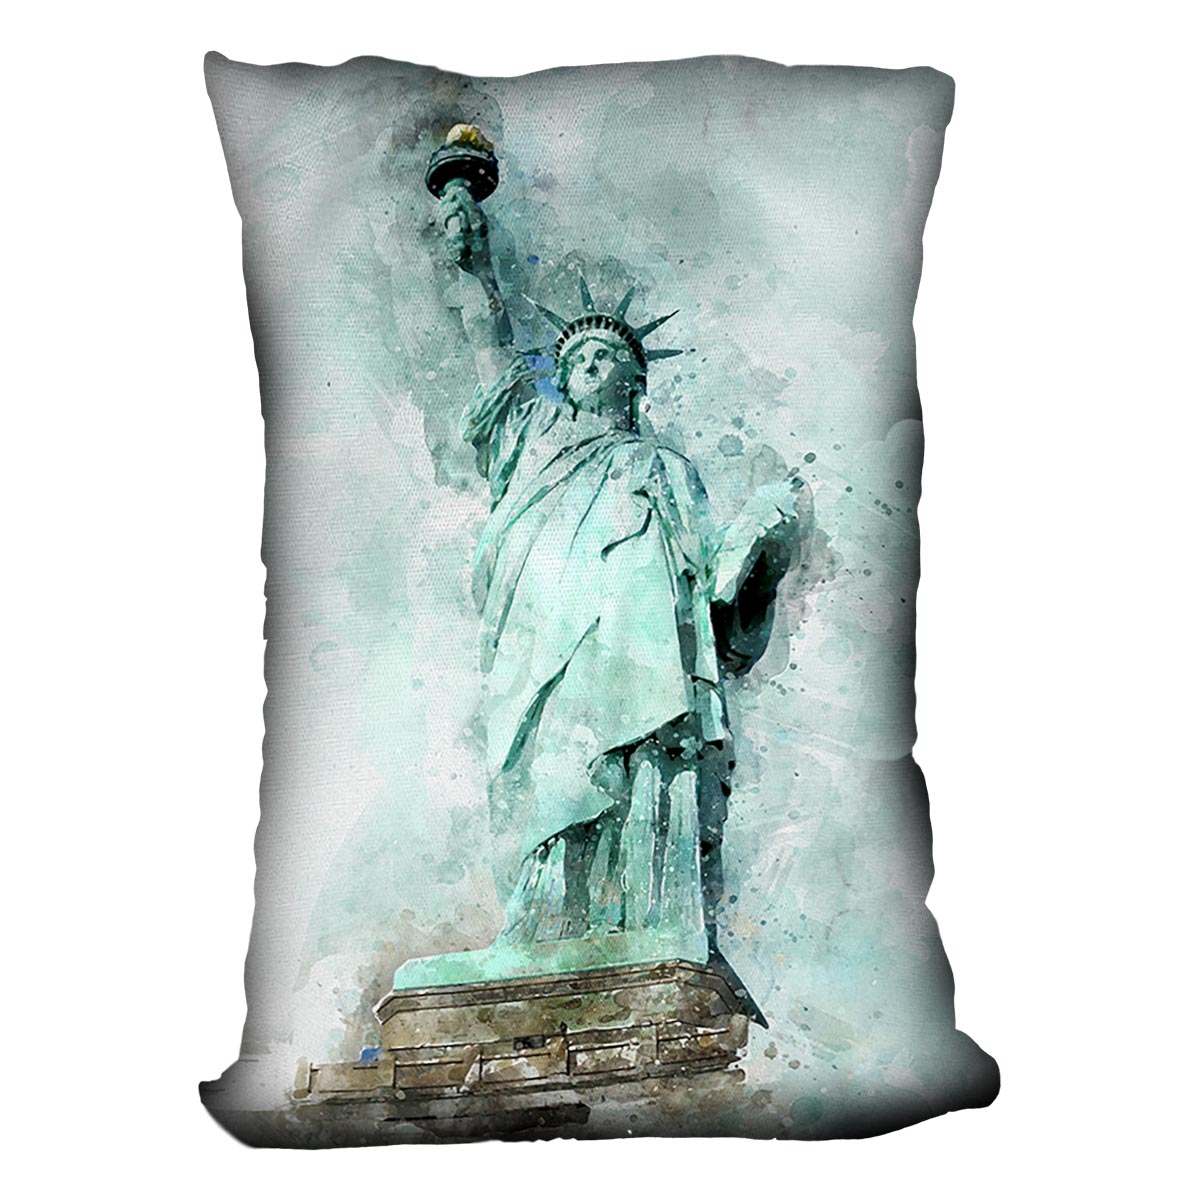 The Statue of Liberty Cushion